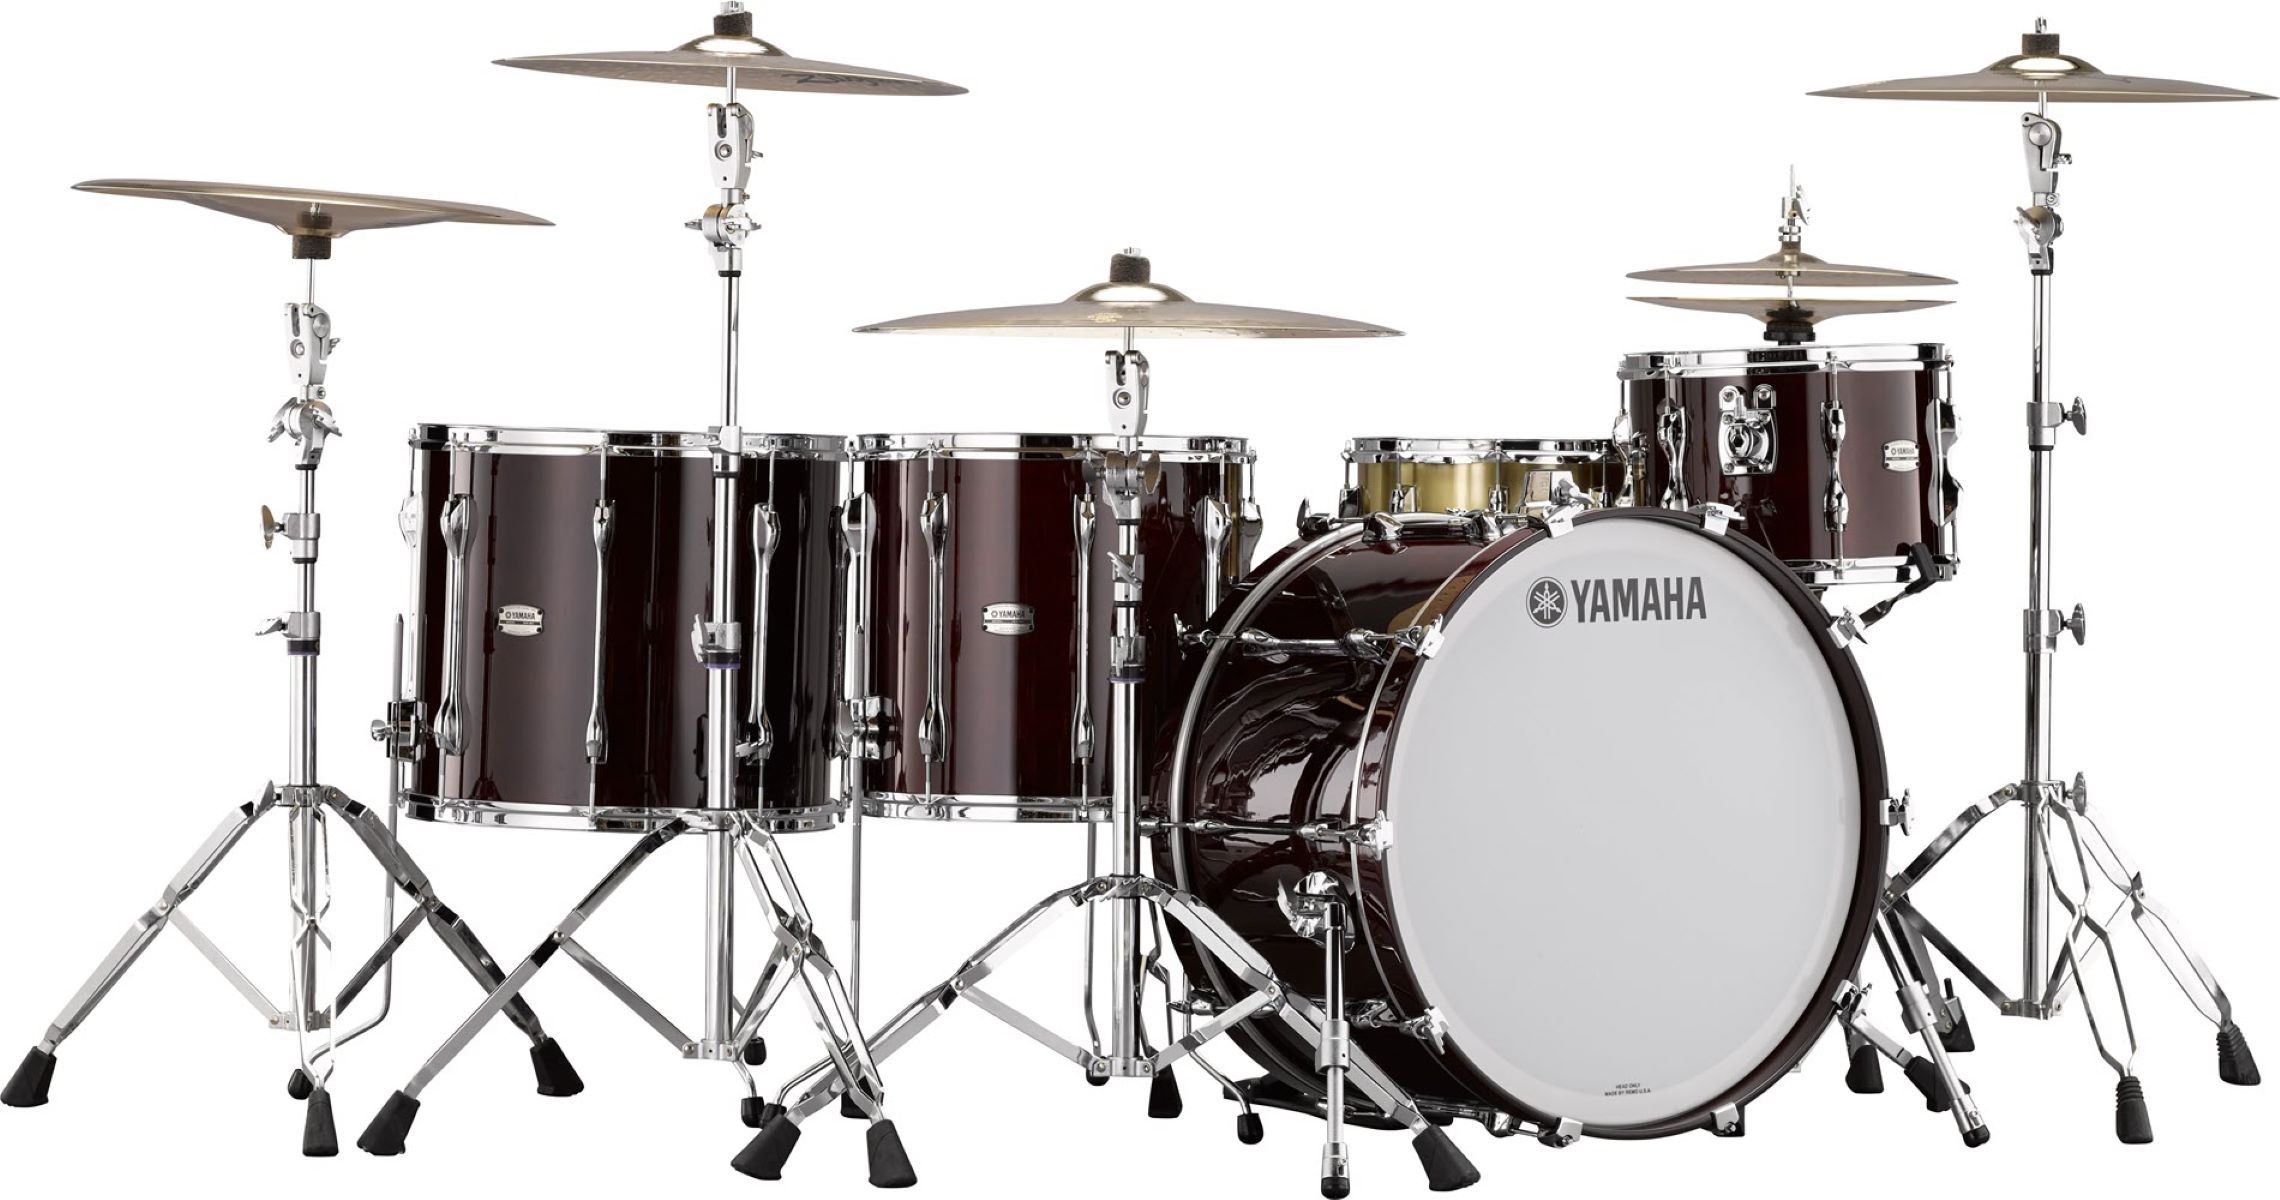 What Is The Best Wood For Drums